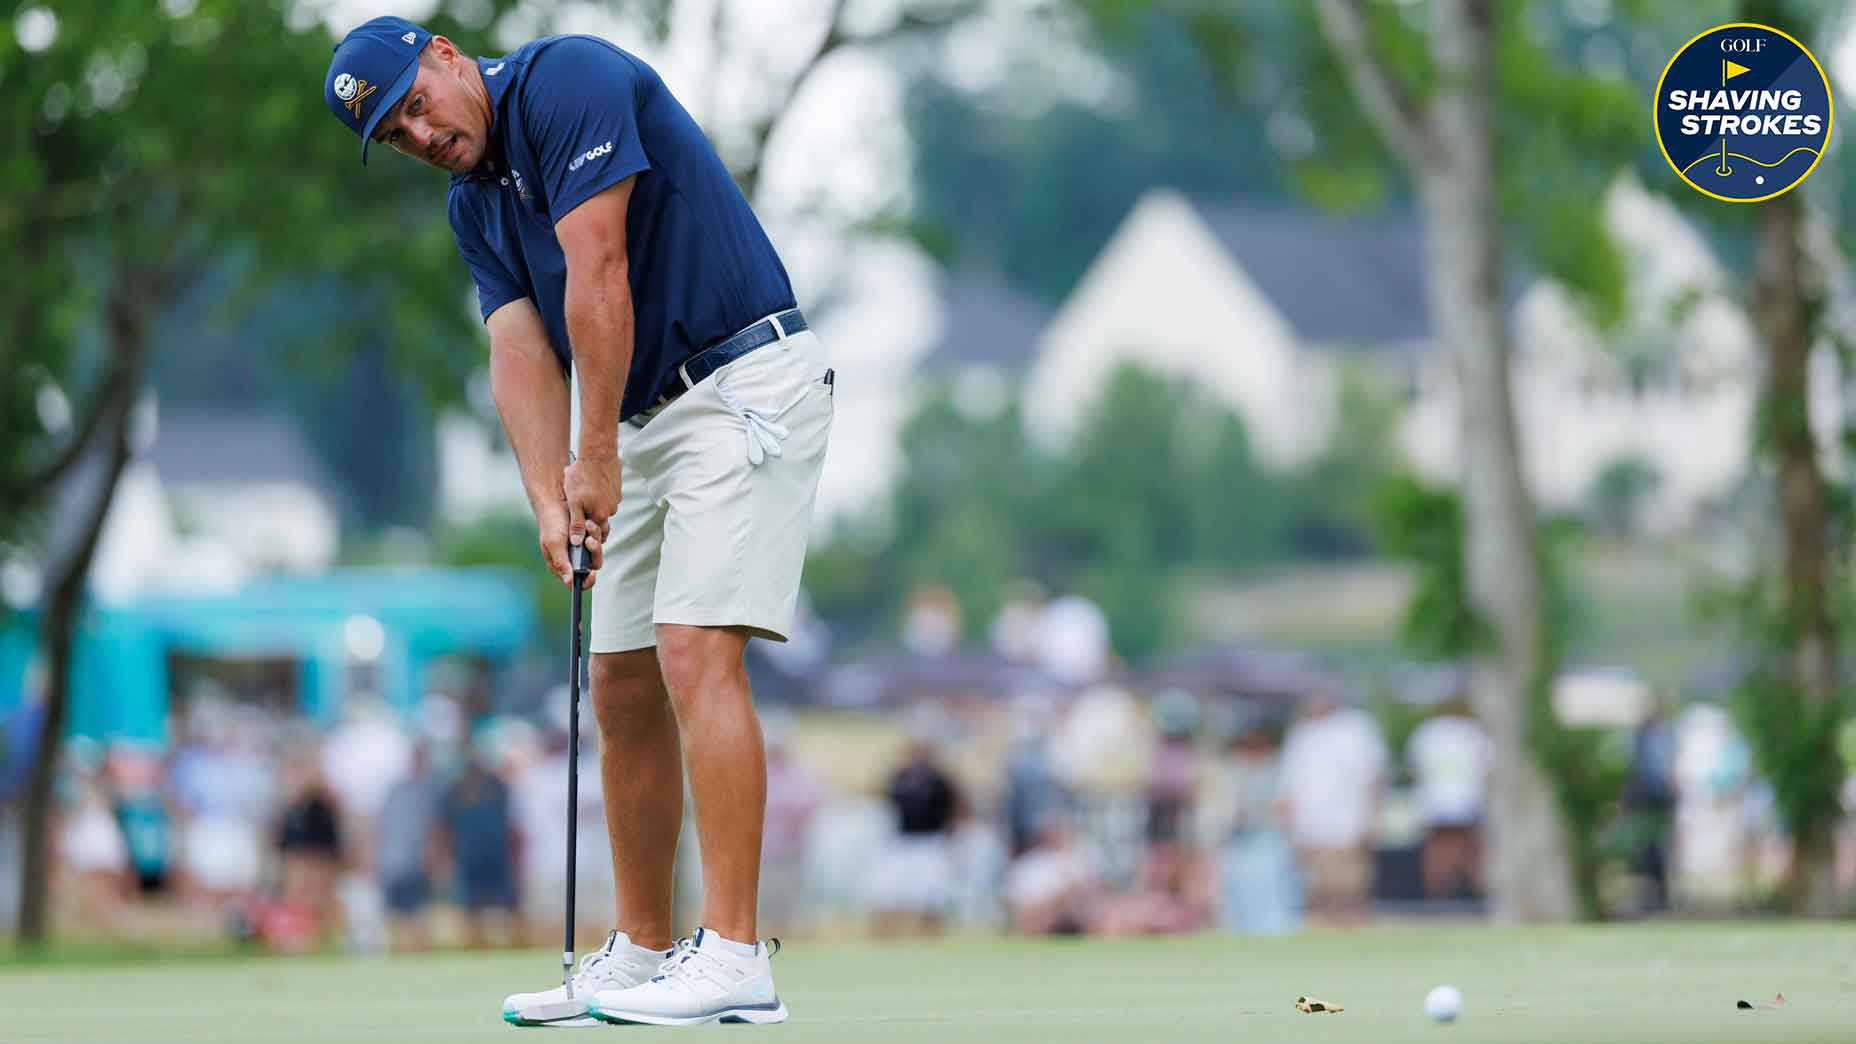 U.S. Open champion Bryson DeChambeau shares a few simplified putting tips that are sure to help improve your short game